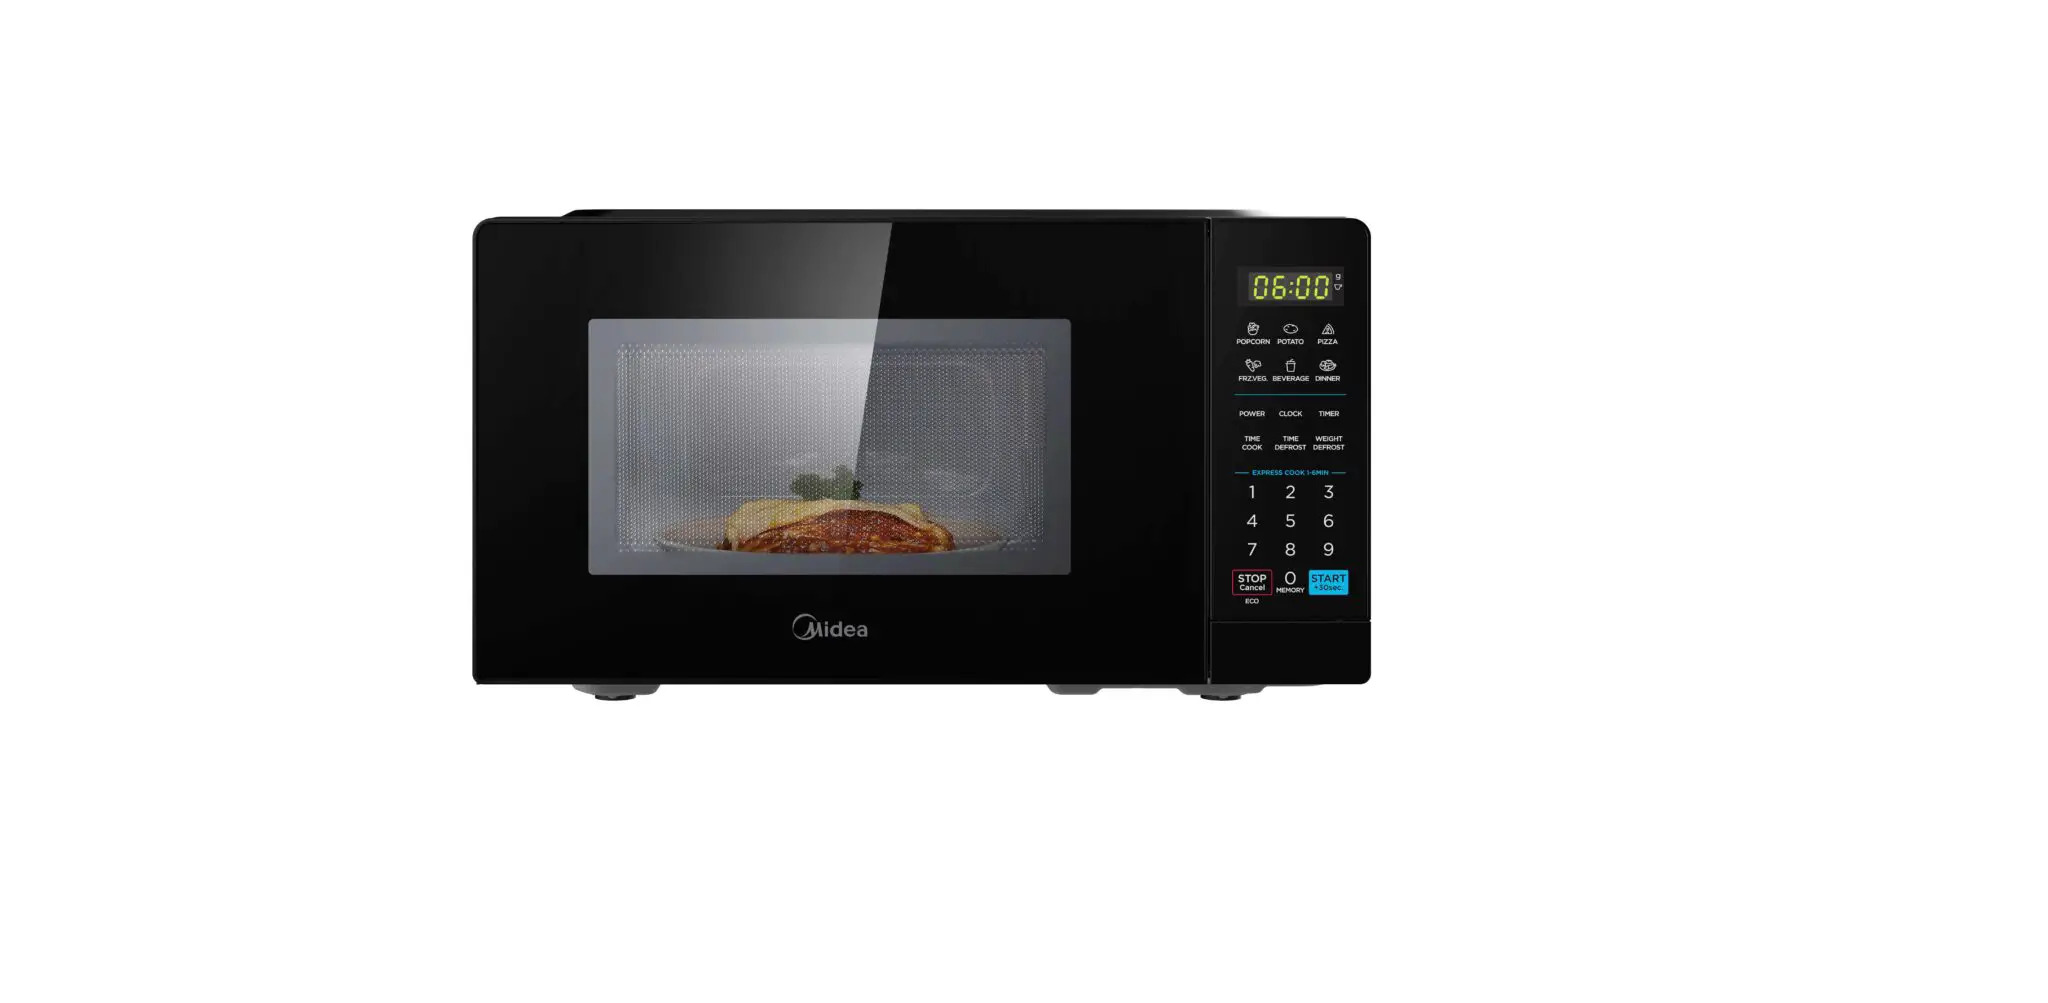 MMO-AM920M (BK) Microwave Oven